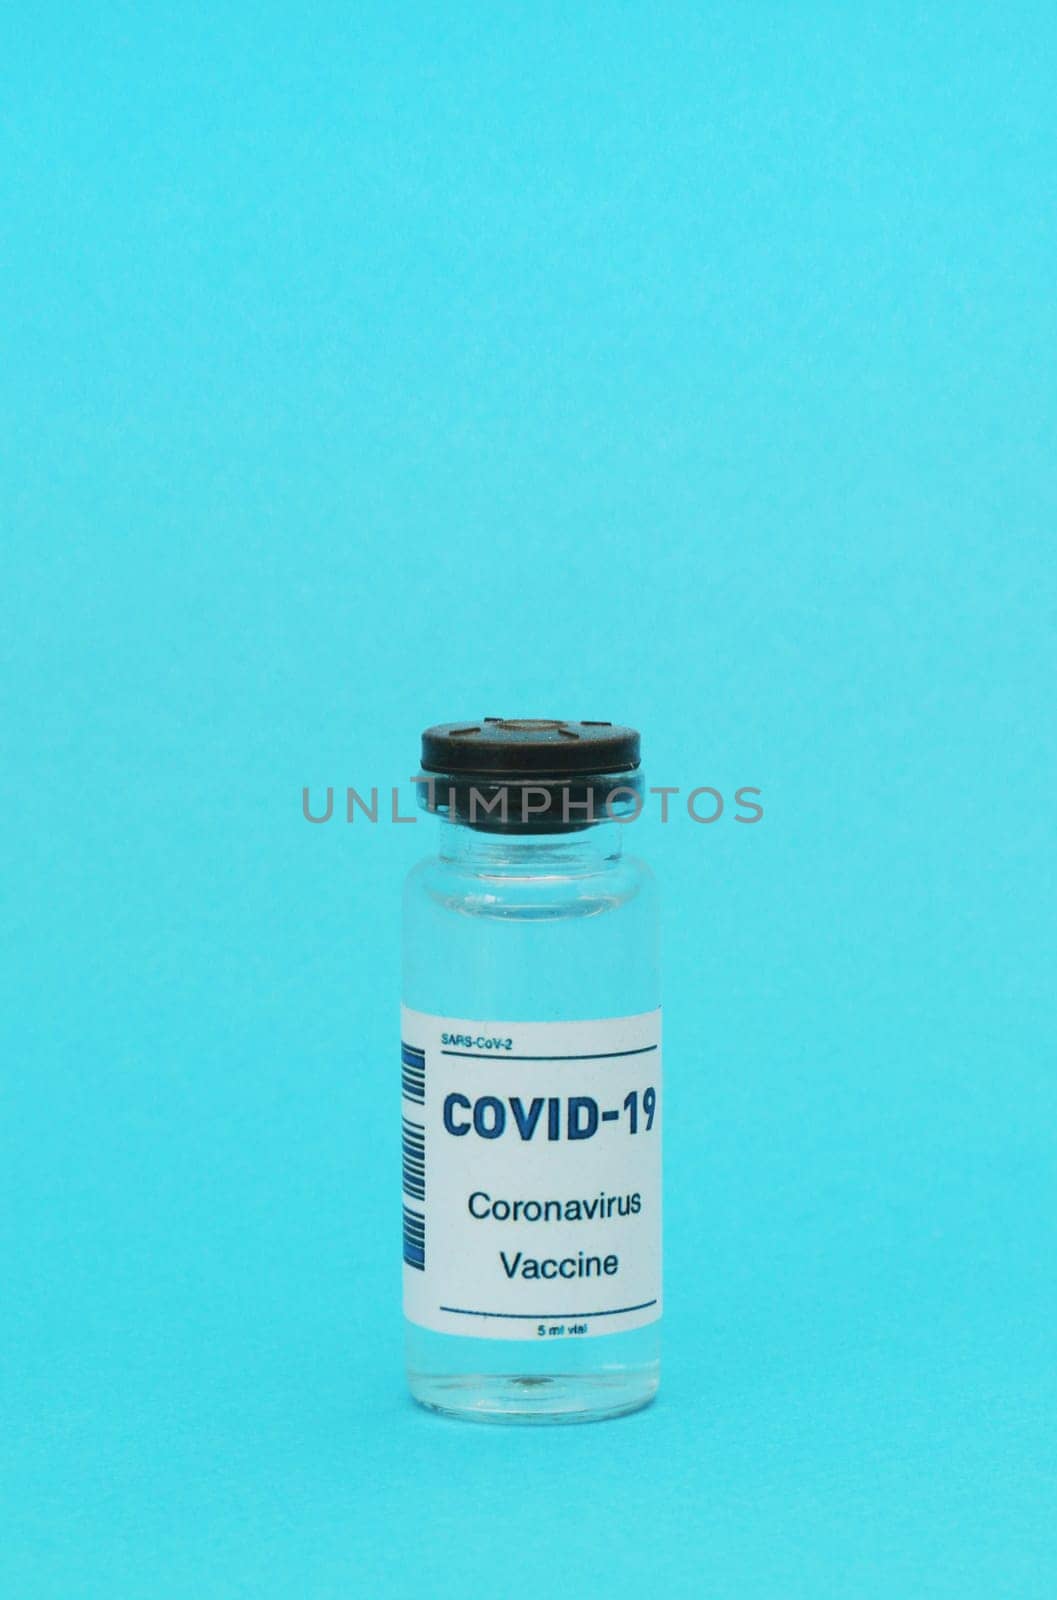 Medical ampoule from the covid-19 vaccine. by gelog67